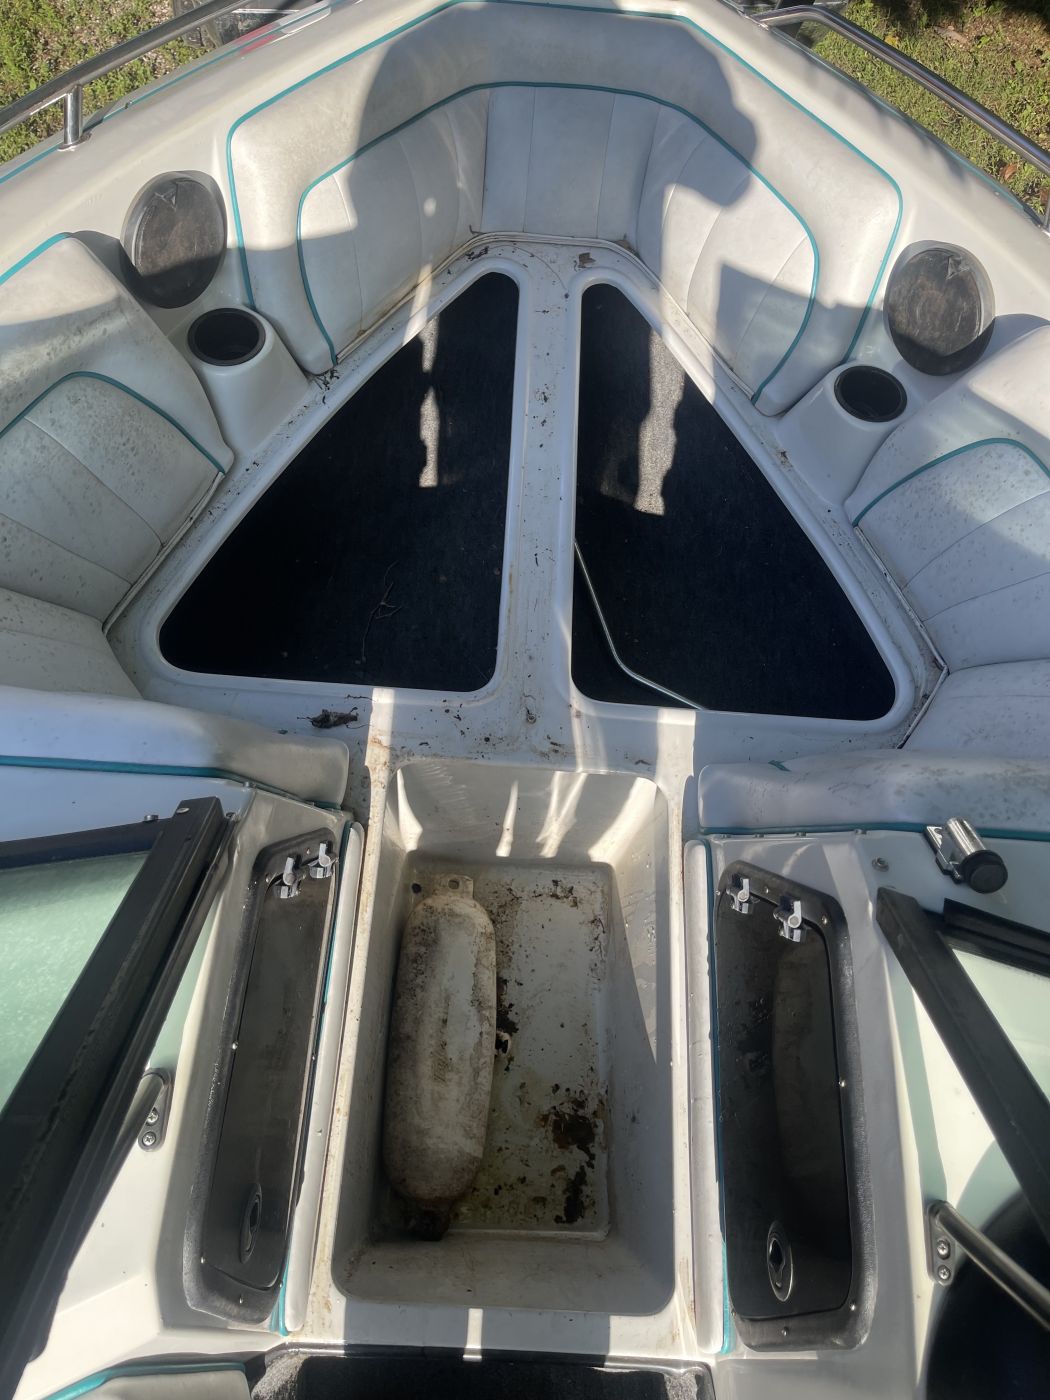 Wakeboard Boat Cleaning